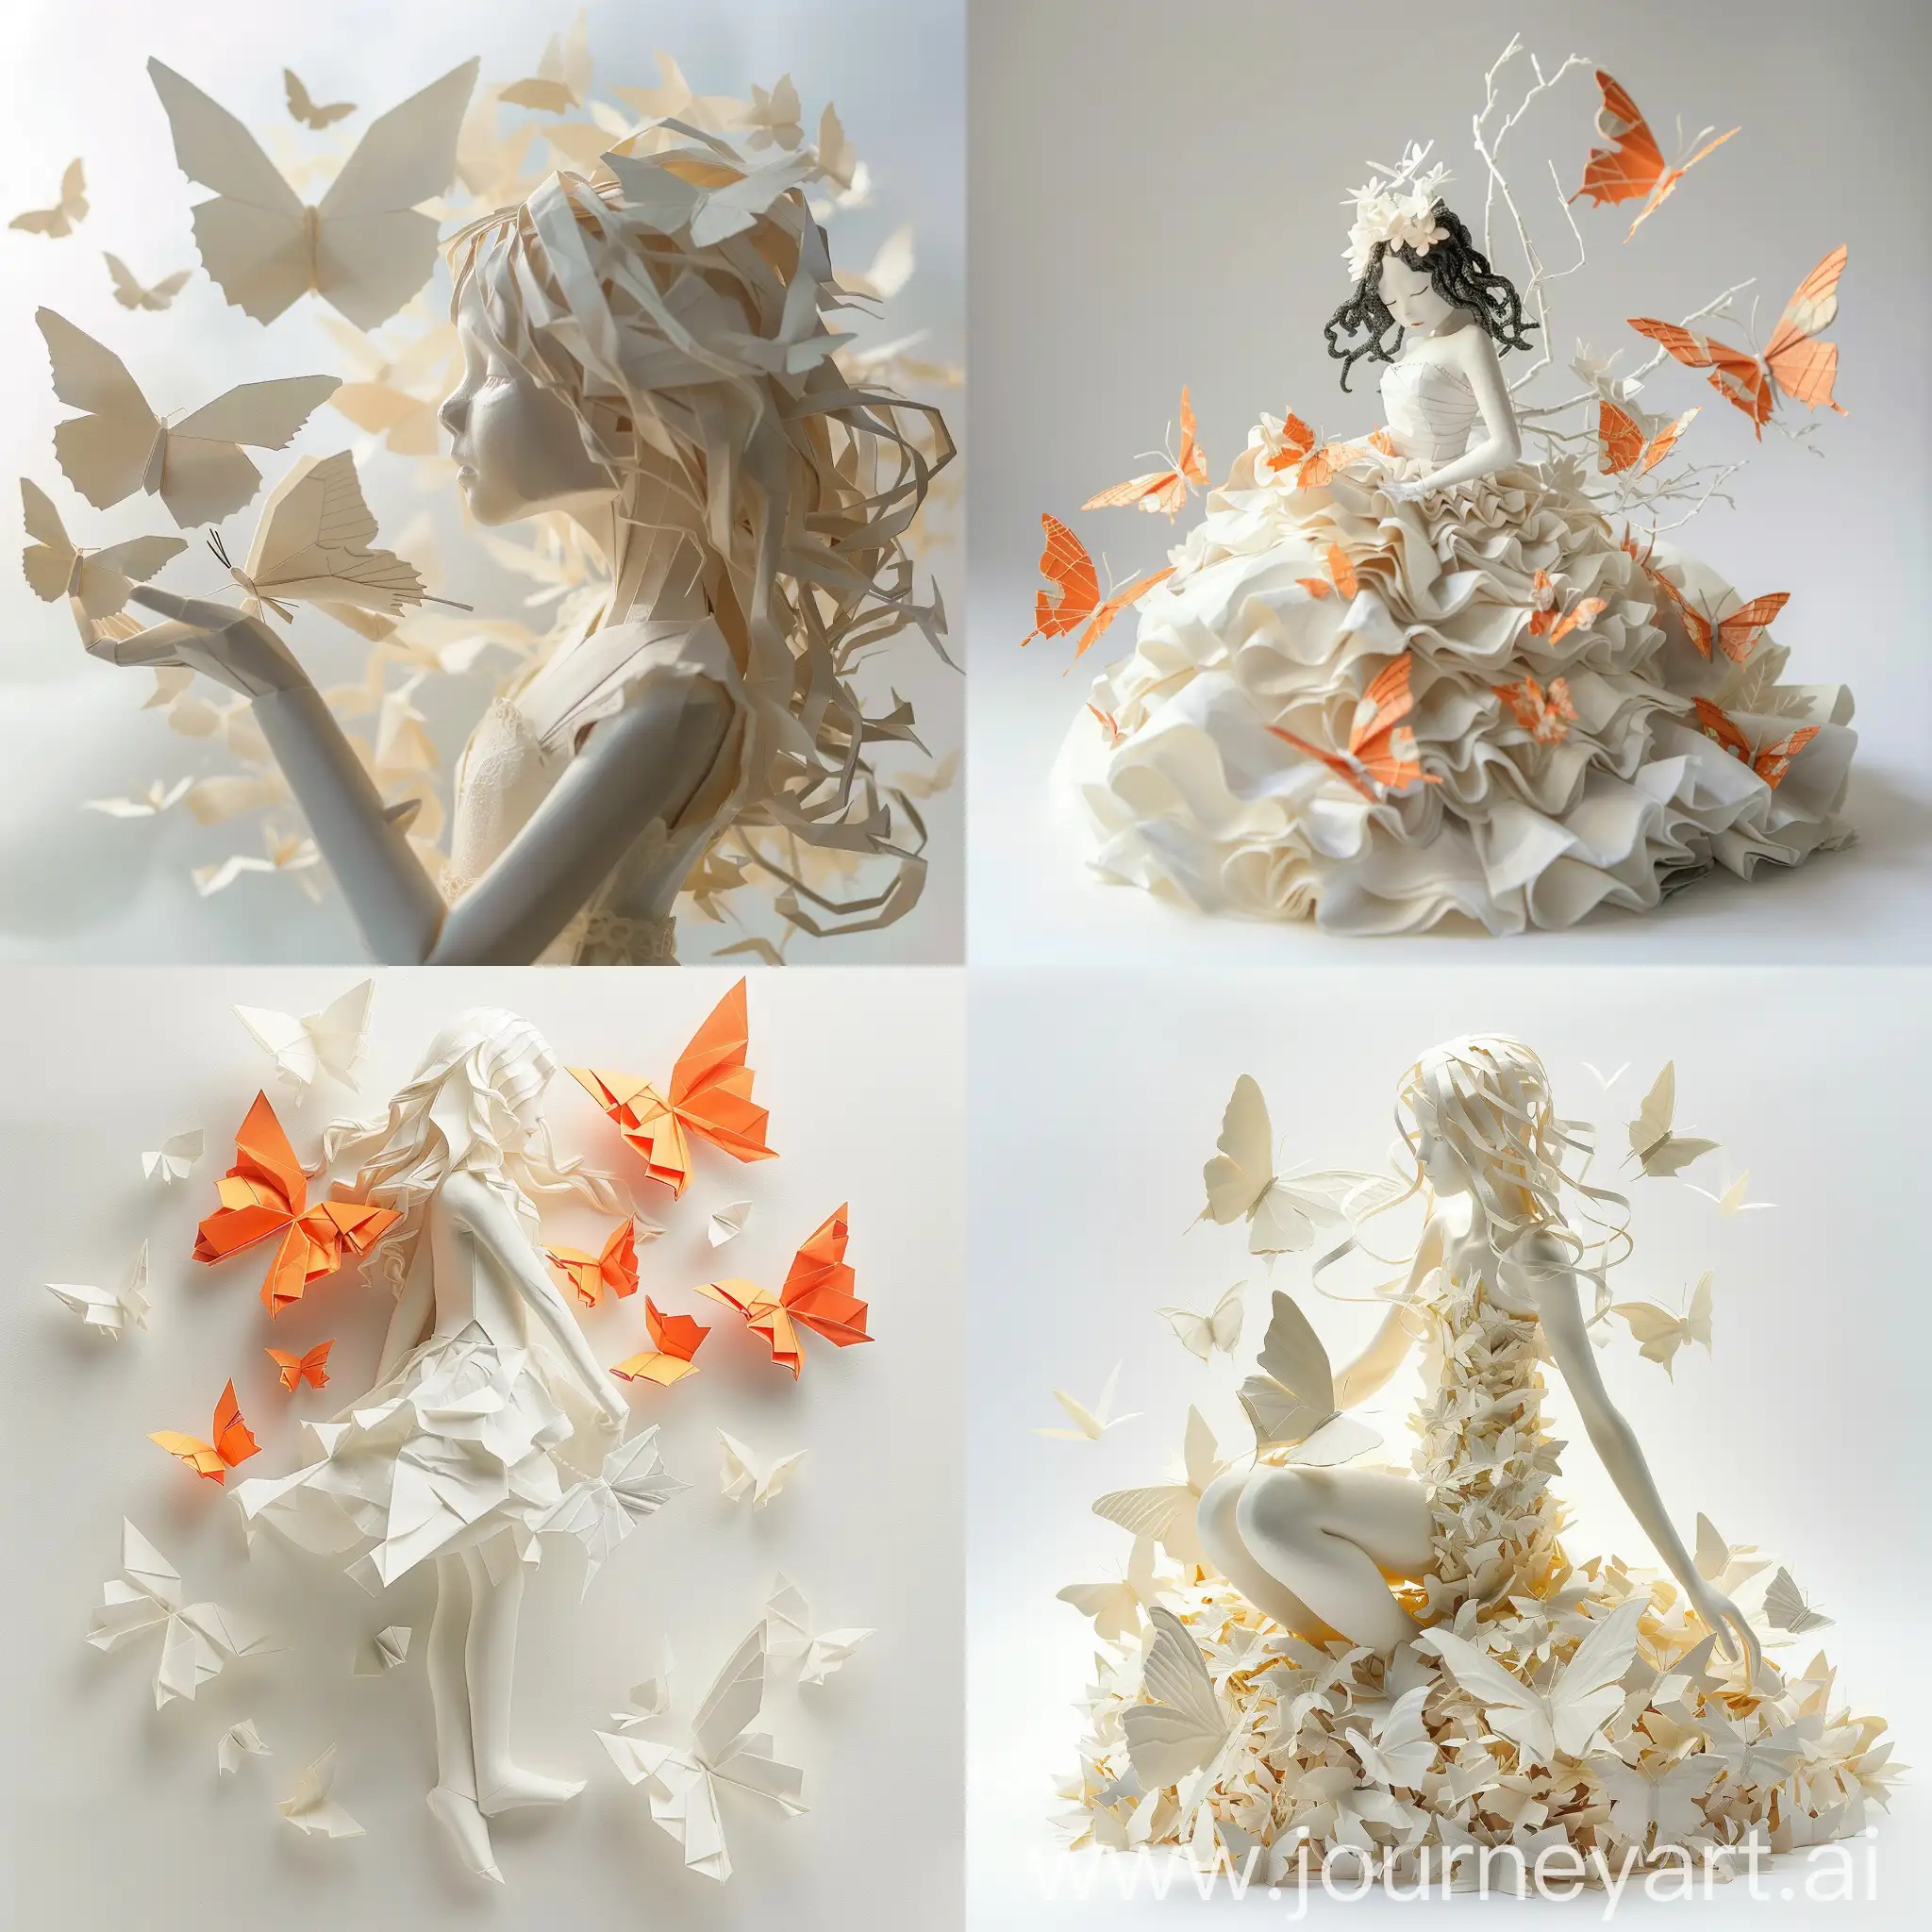 Dreamlike-Interplay-Girl-and-Butterfly-Origami-Sculptures